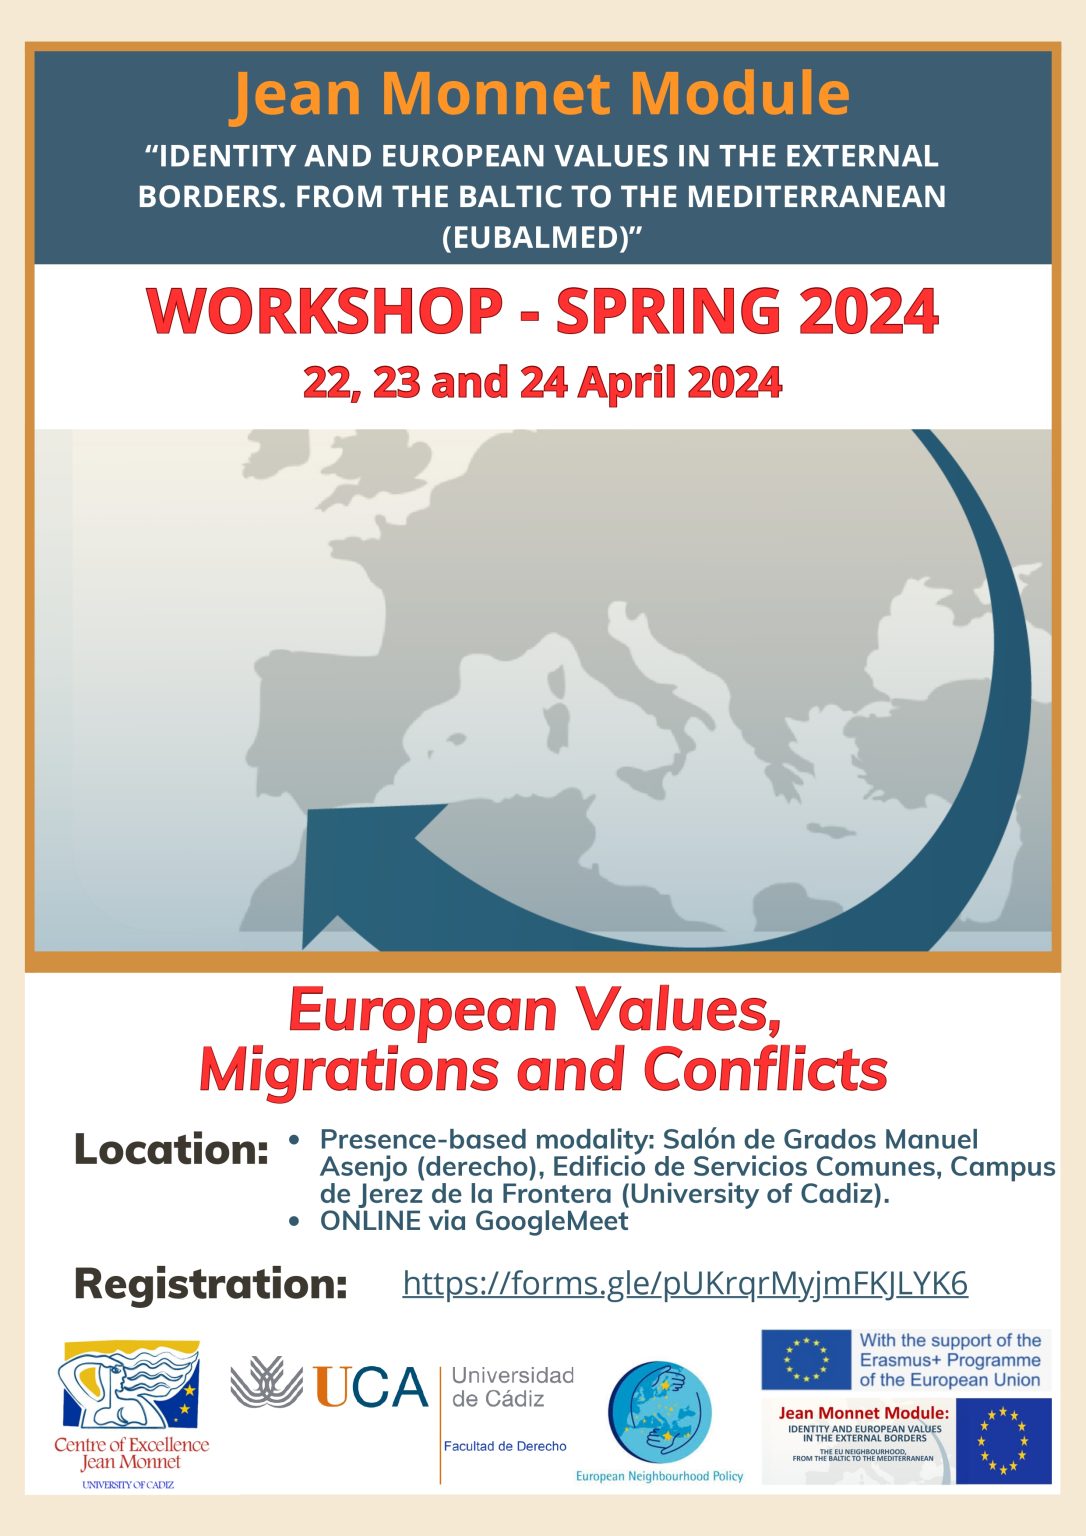 WORKSHOP: EUROPEAN VALUES, MIGRATIONS AND CONFLICTS– JEAN MONNET MODULE “IDENTITY AND EUROPEAN VALUES IN THE EXTERNAL BORDERS” – 22-23-24 ABRIL 2024